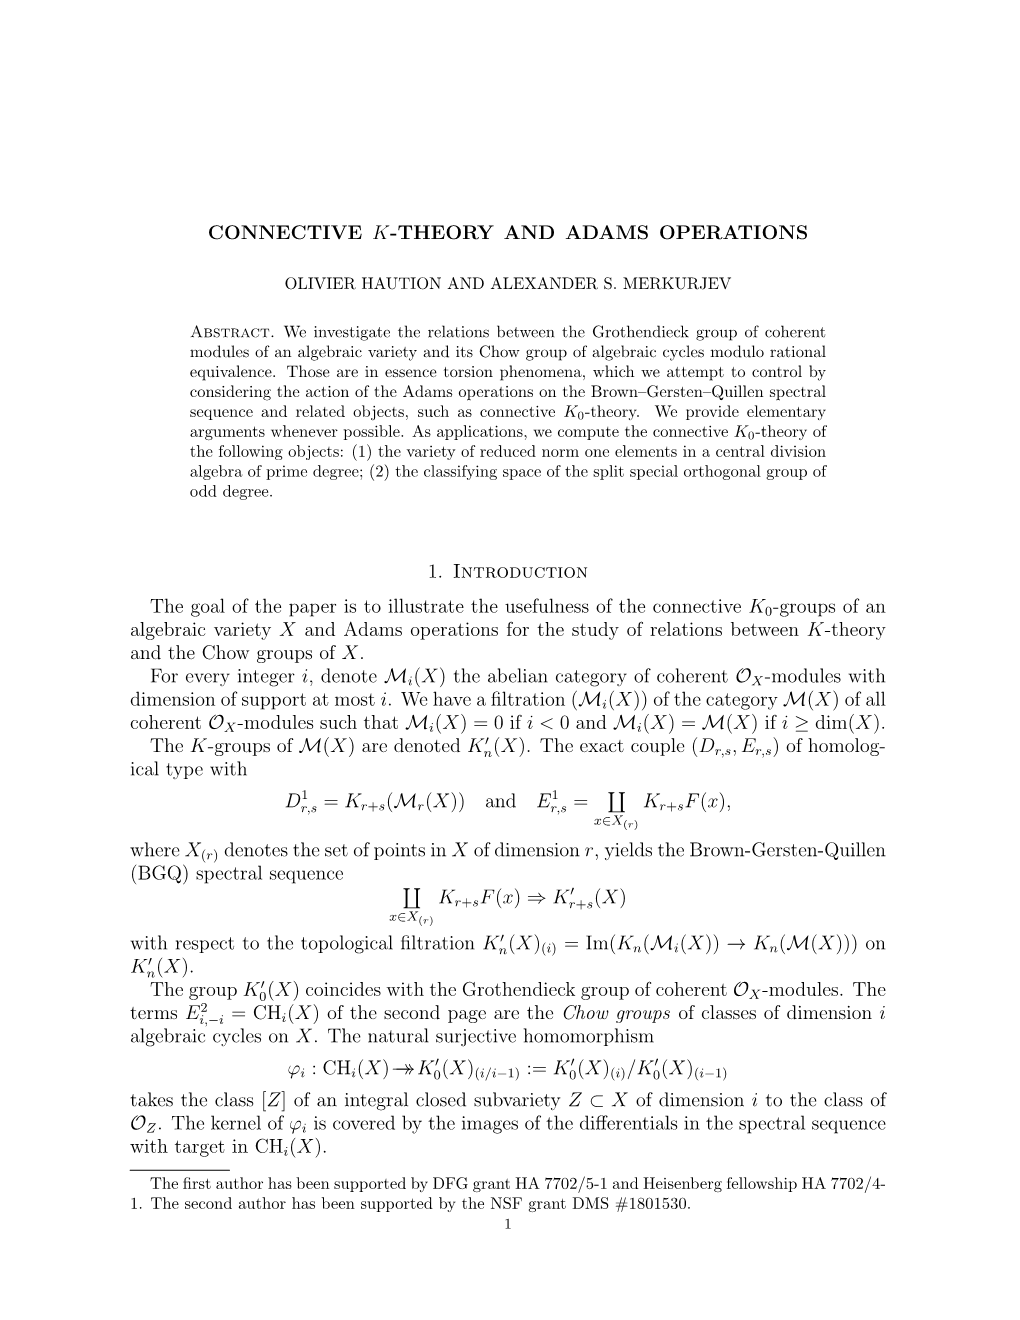 Connective K-Theory and Adams Operations